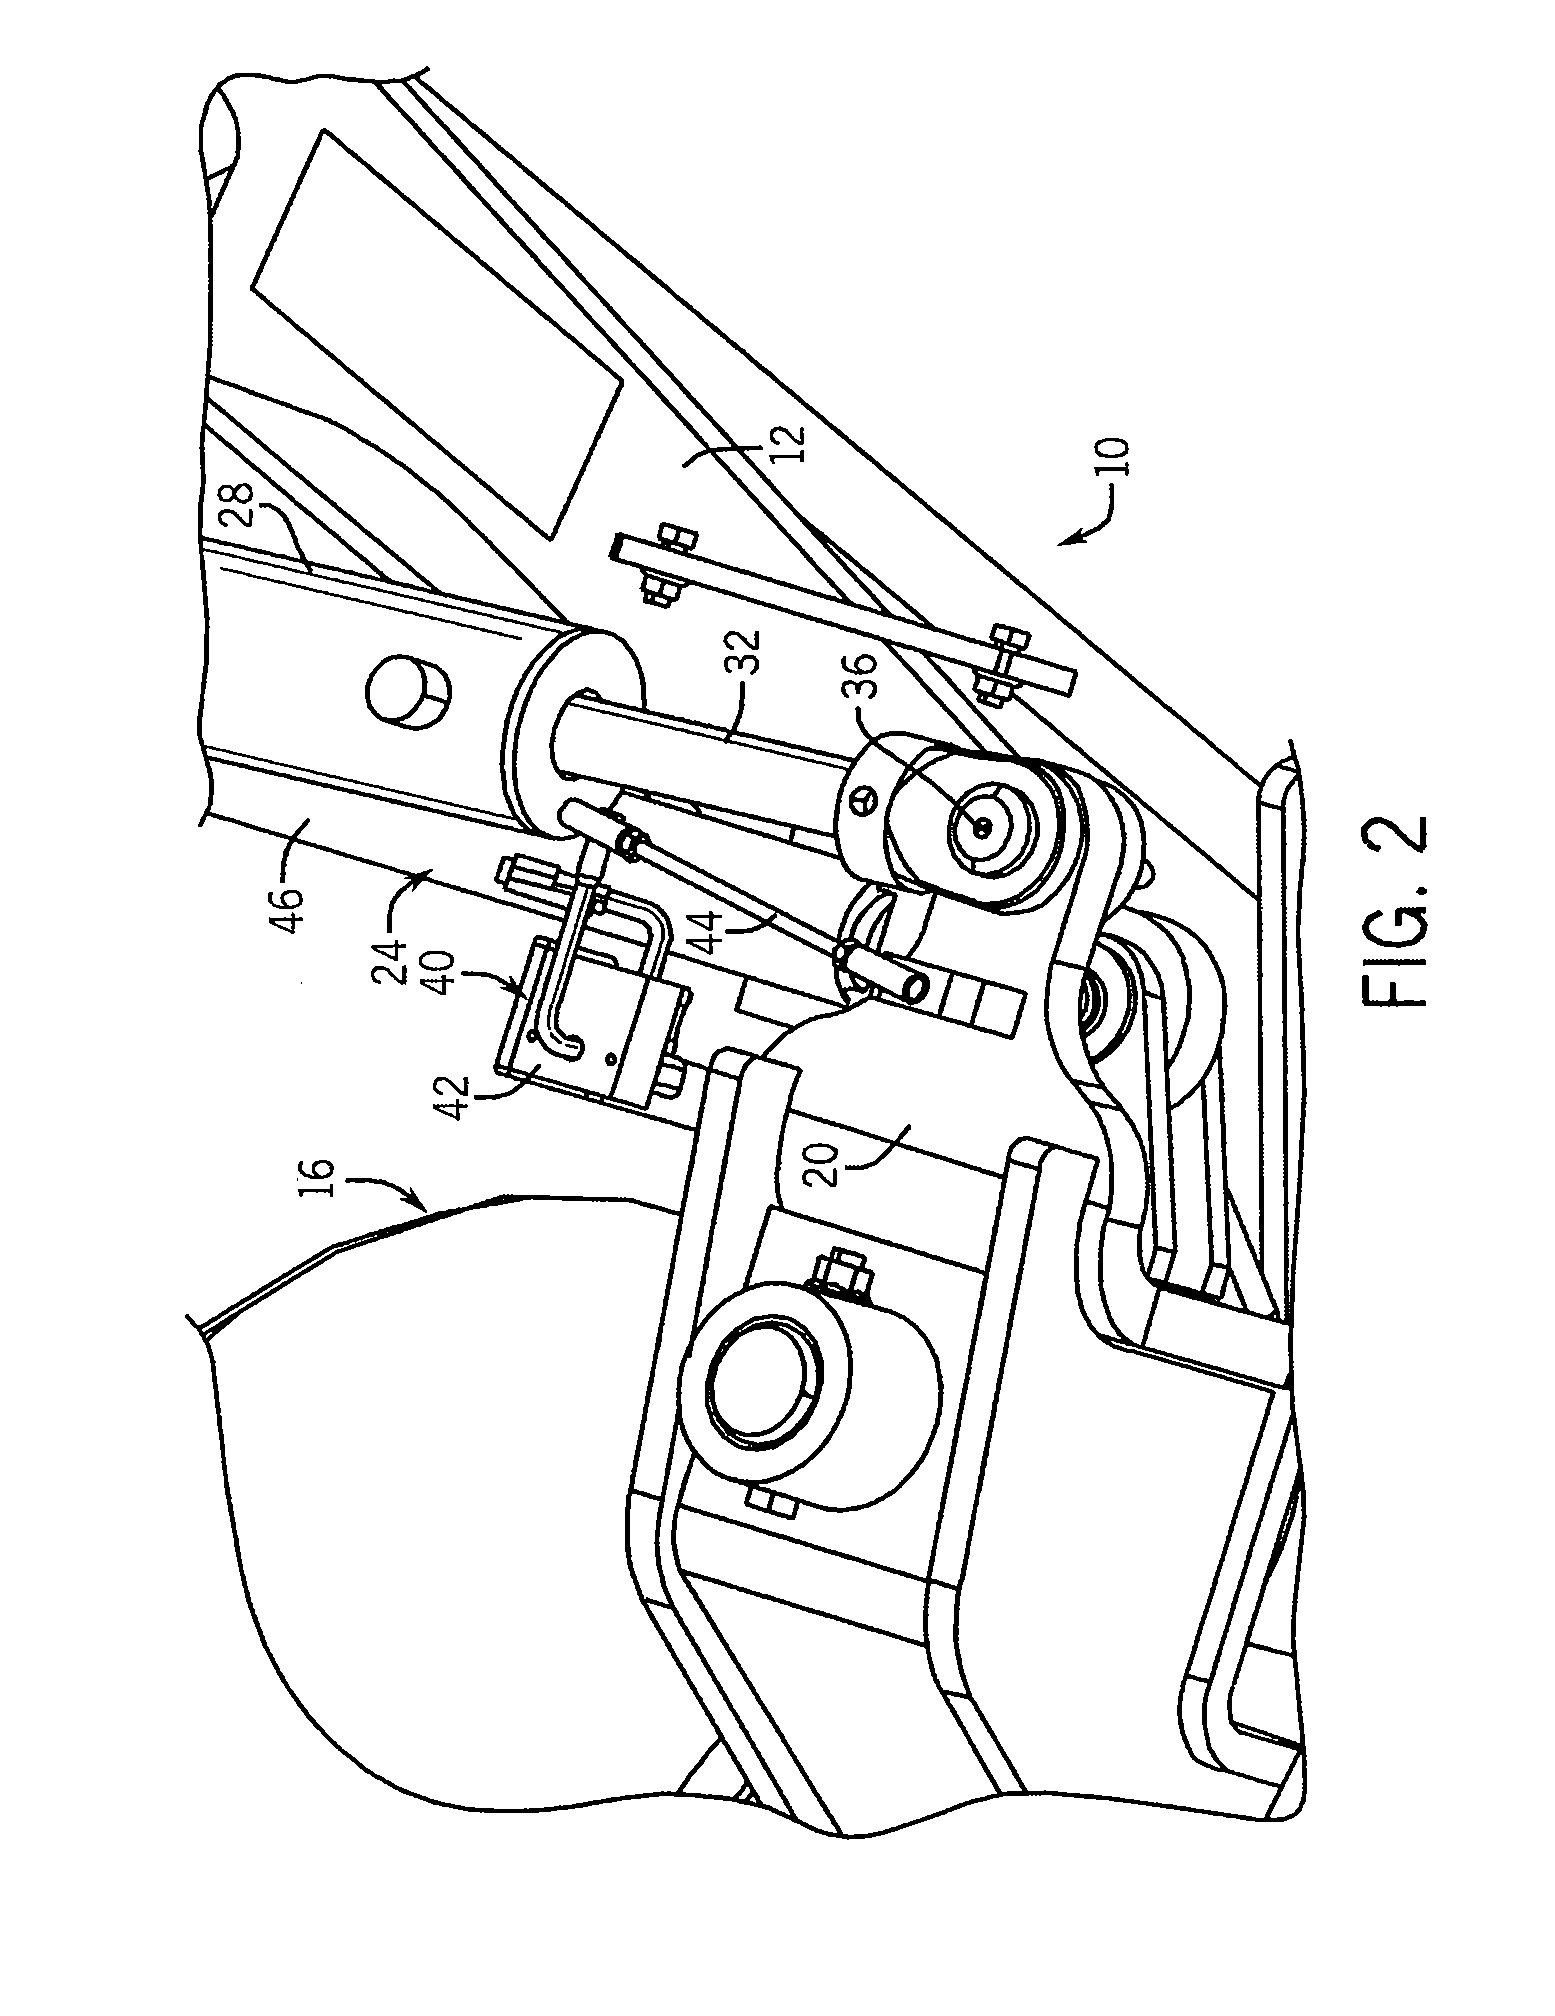 Method for automatic headland turn correction of farm implement steered by implement steering system